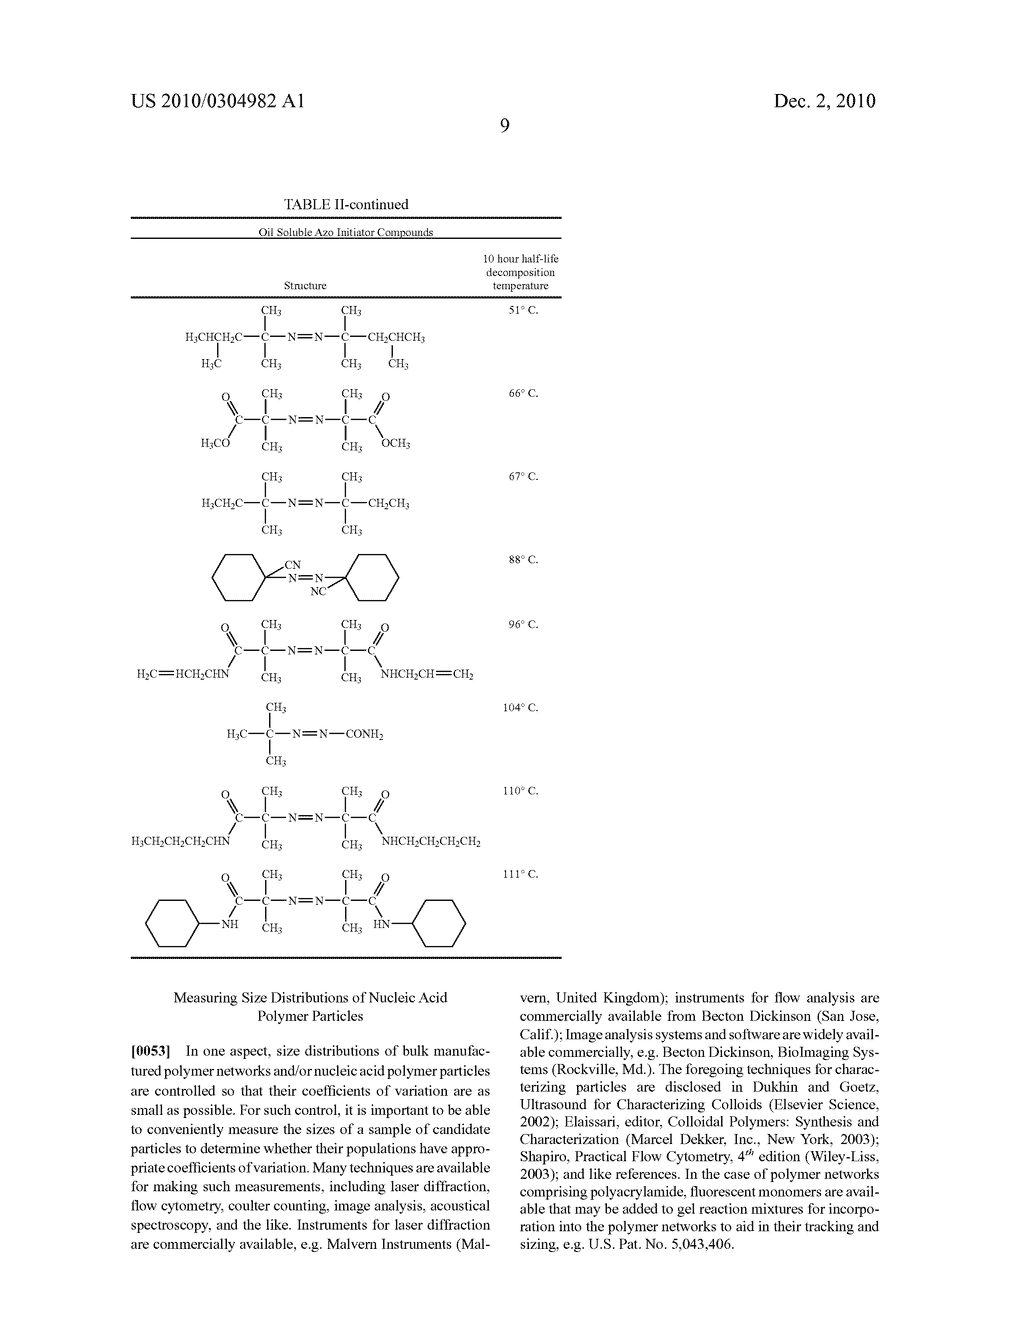 SCAFFOLDED NUCLEIC ACID POLYMER PARTICLES AND METHODS OF MAKING AND USING - diagram, schematic, and image 18